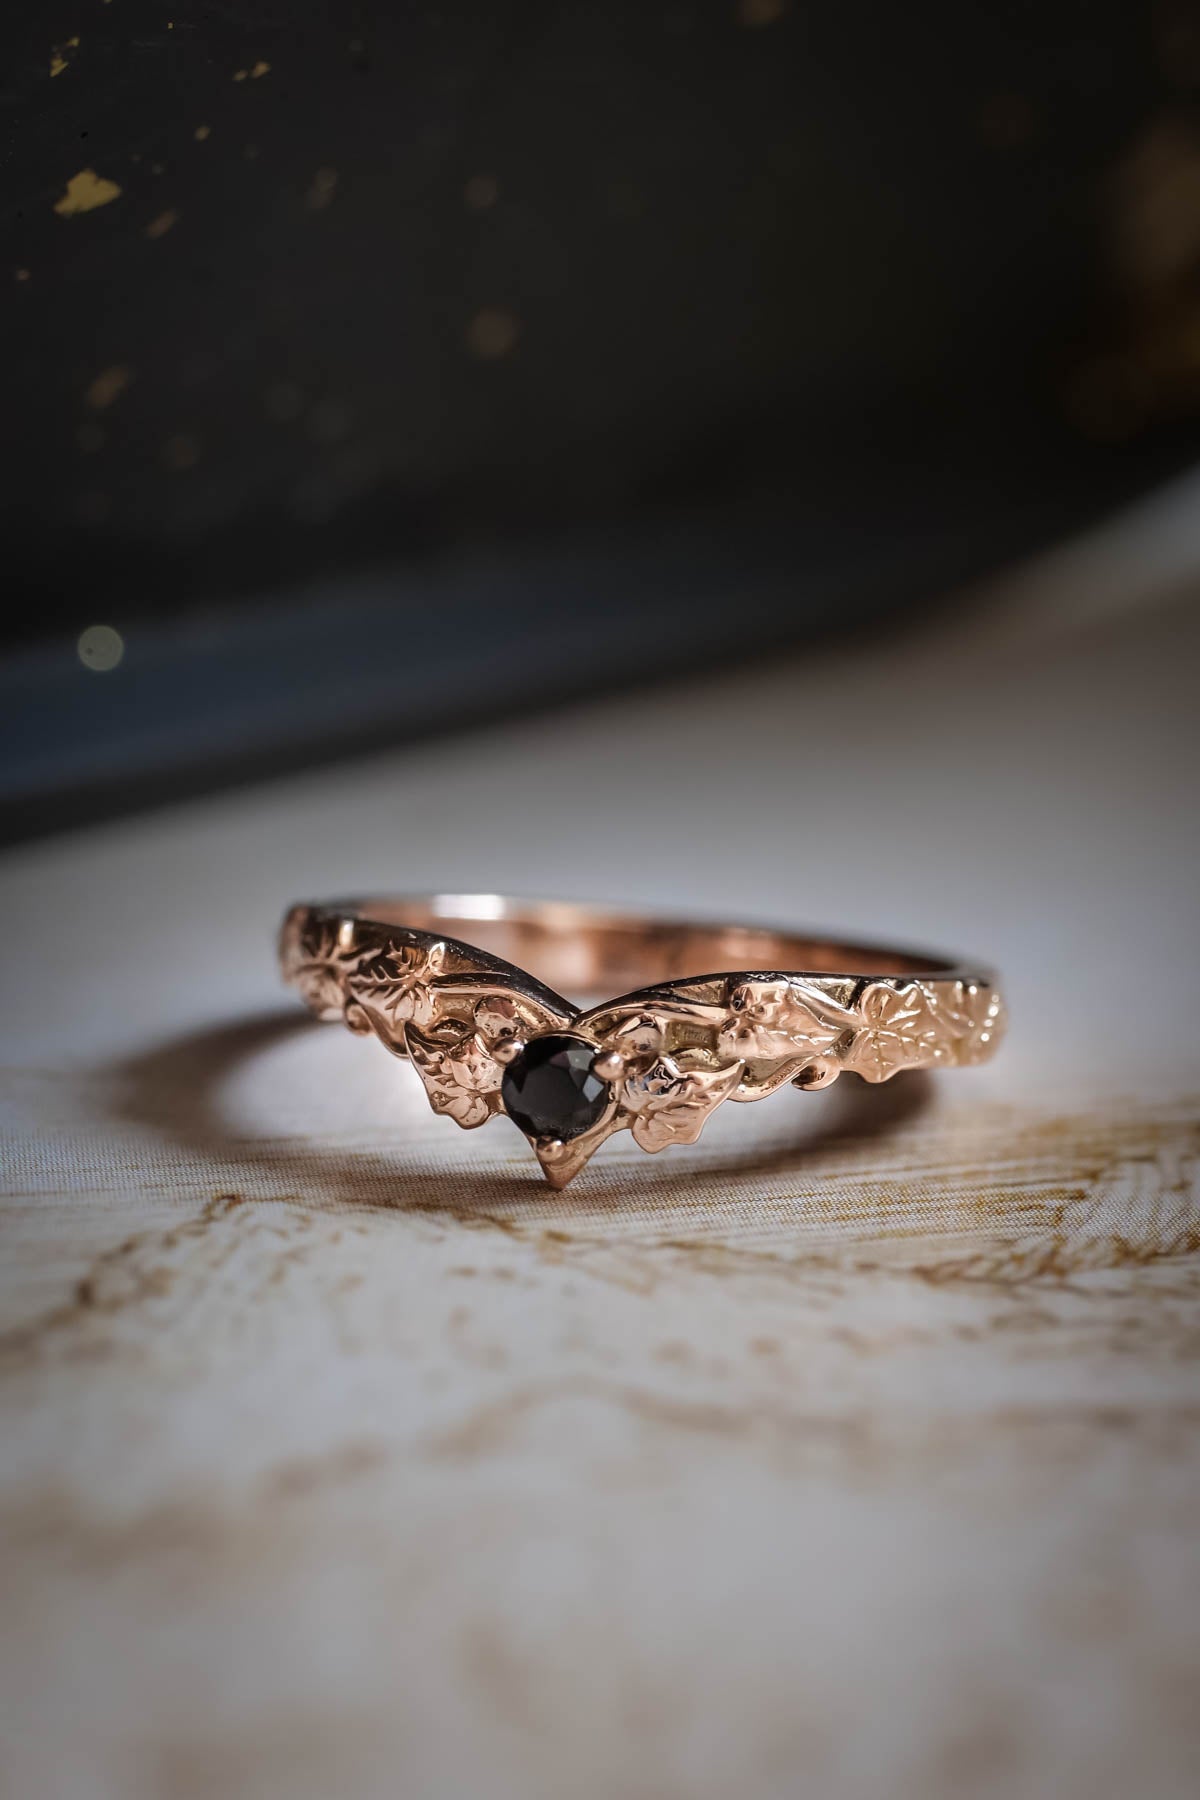 Gold leaf wedding band with black diamond, ivy leaves ring - Eden Garden Jewelry™